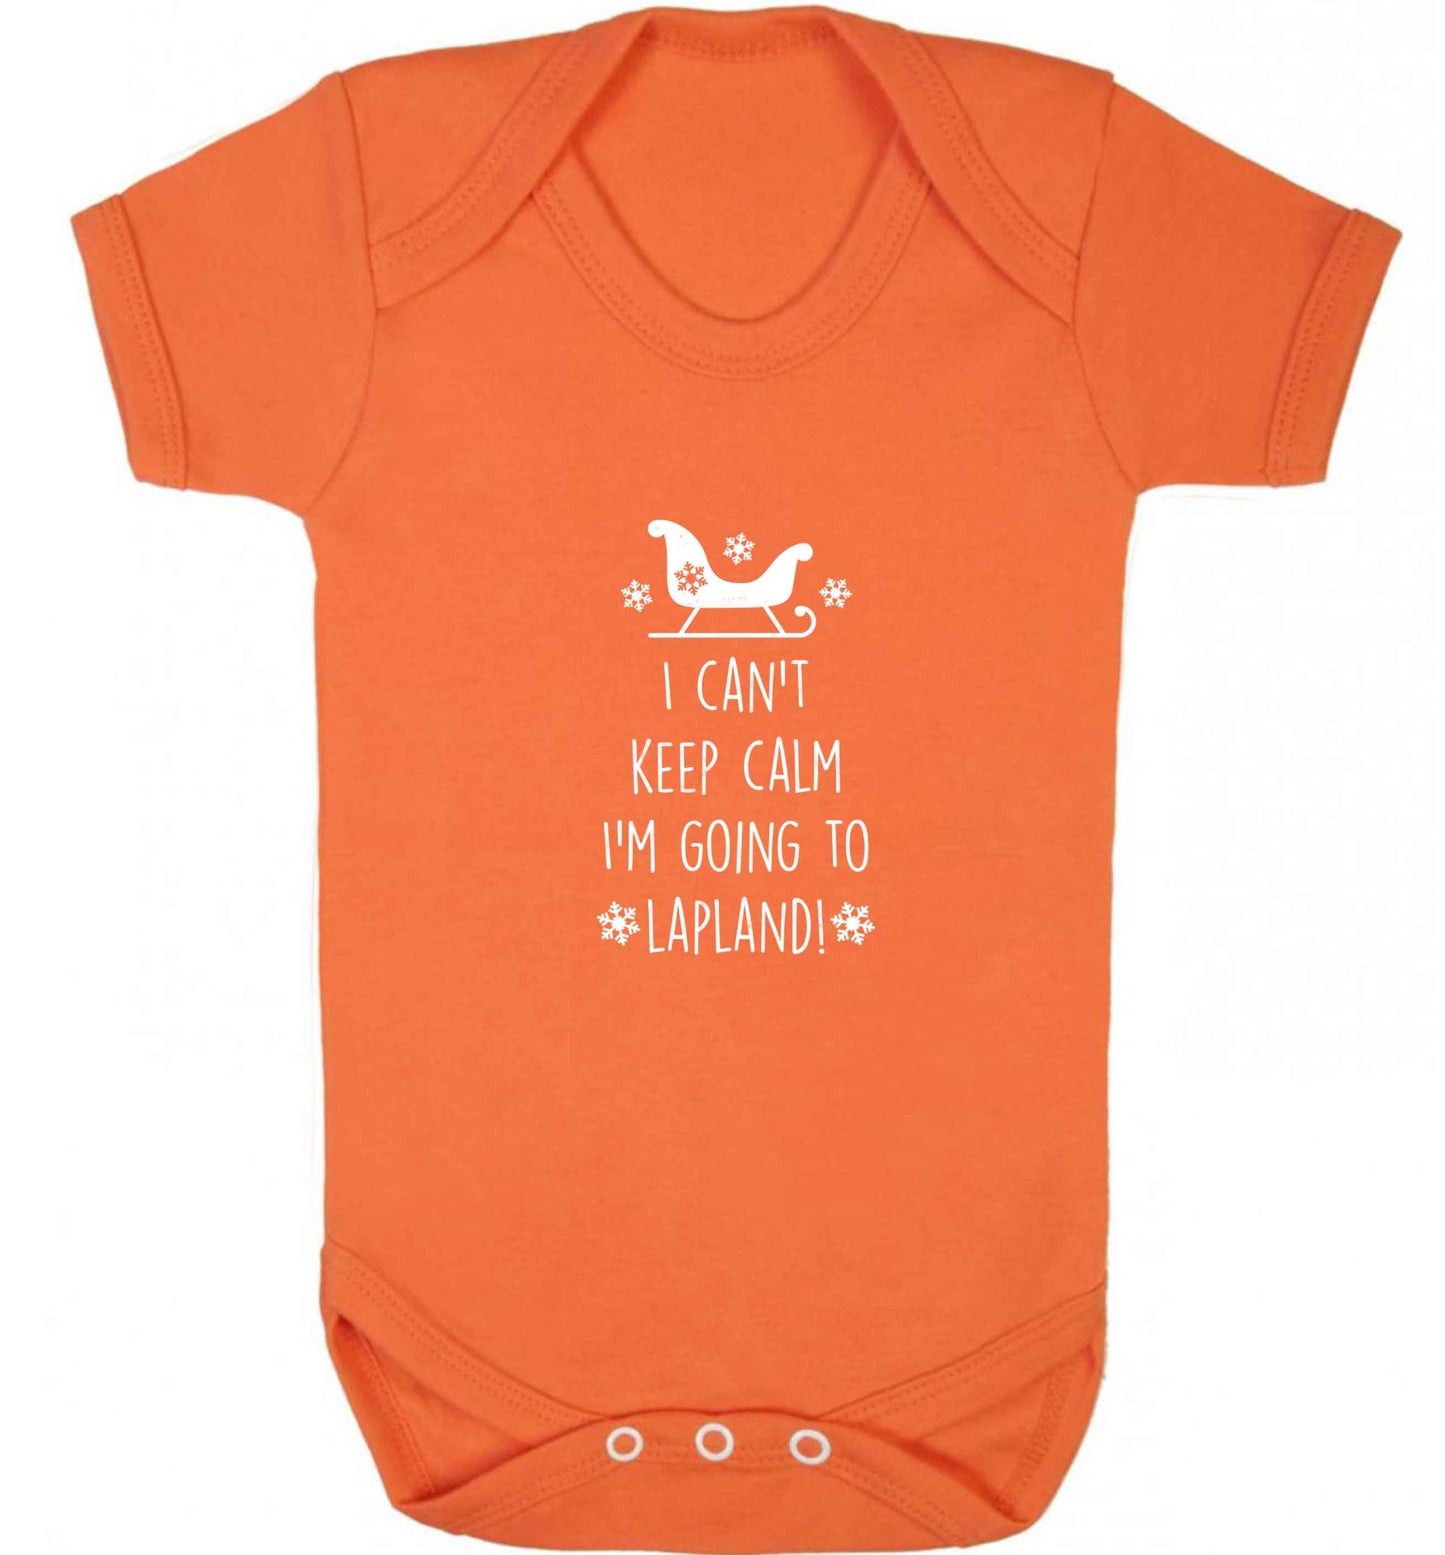 I can't keep calm I'm going to Lapland baby vest orange 18-24 months